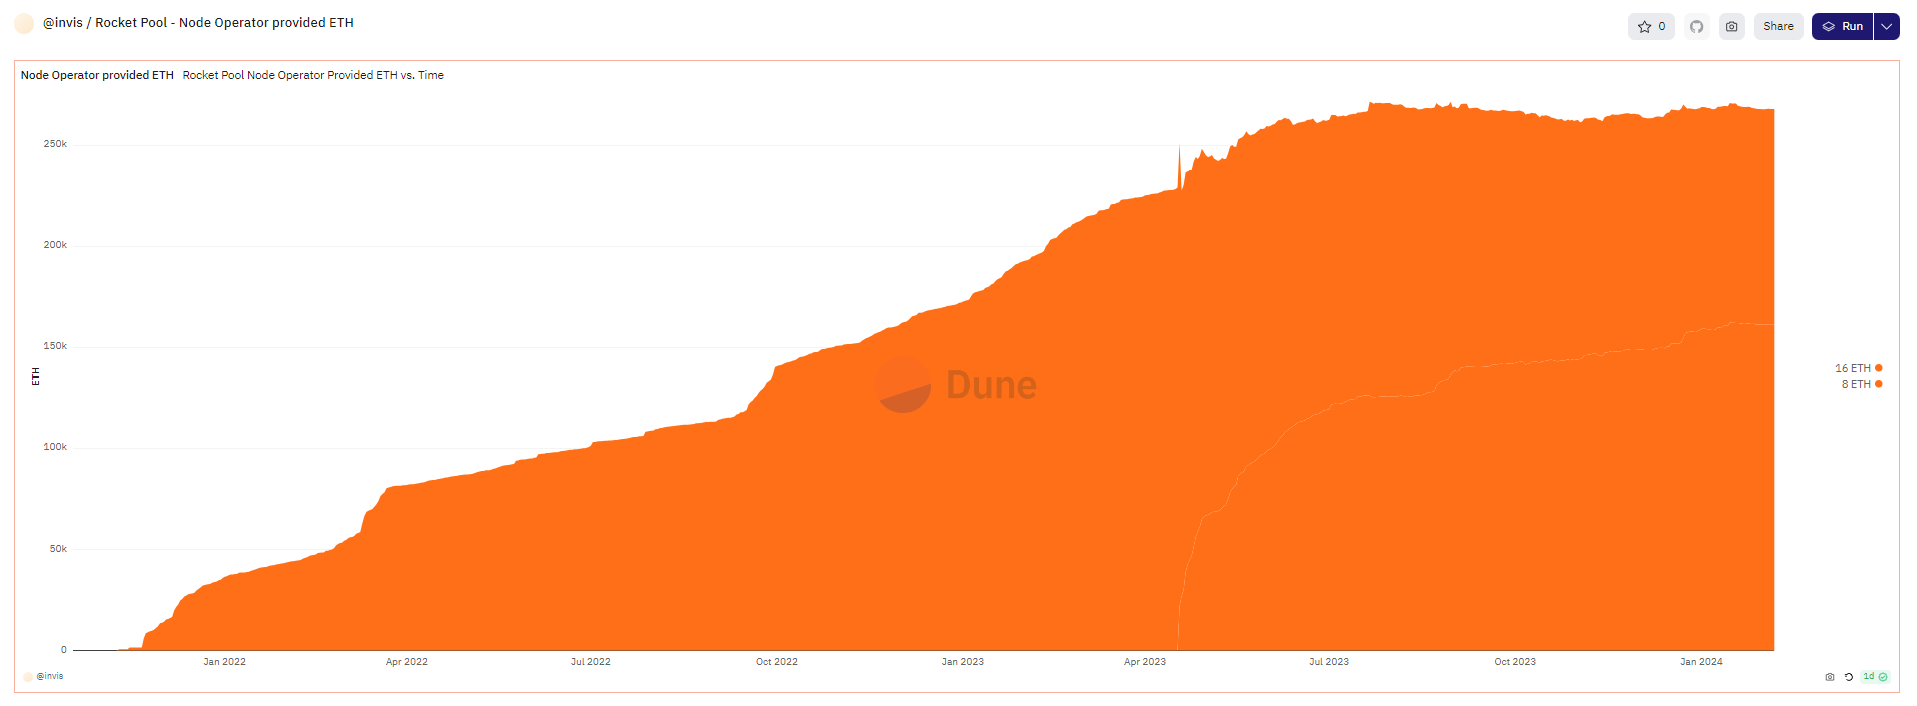 https://dune.com/invis/rp-neth - chart shows the total amount of ETH deposited by node operators has been flat/falling for >200 days. Shout out invis.eth.